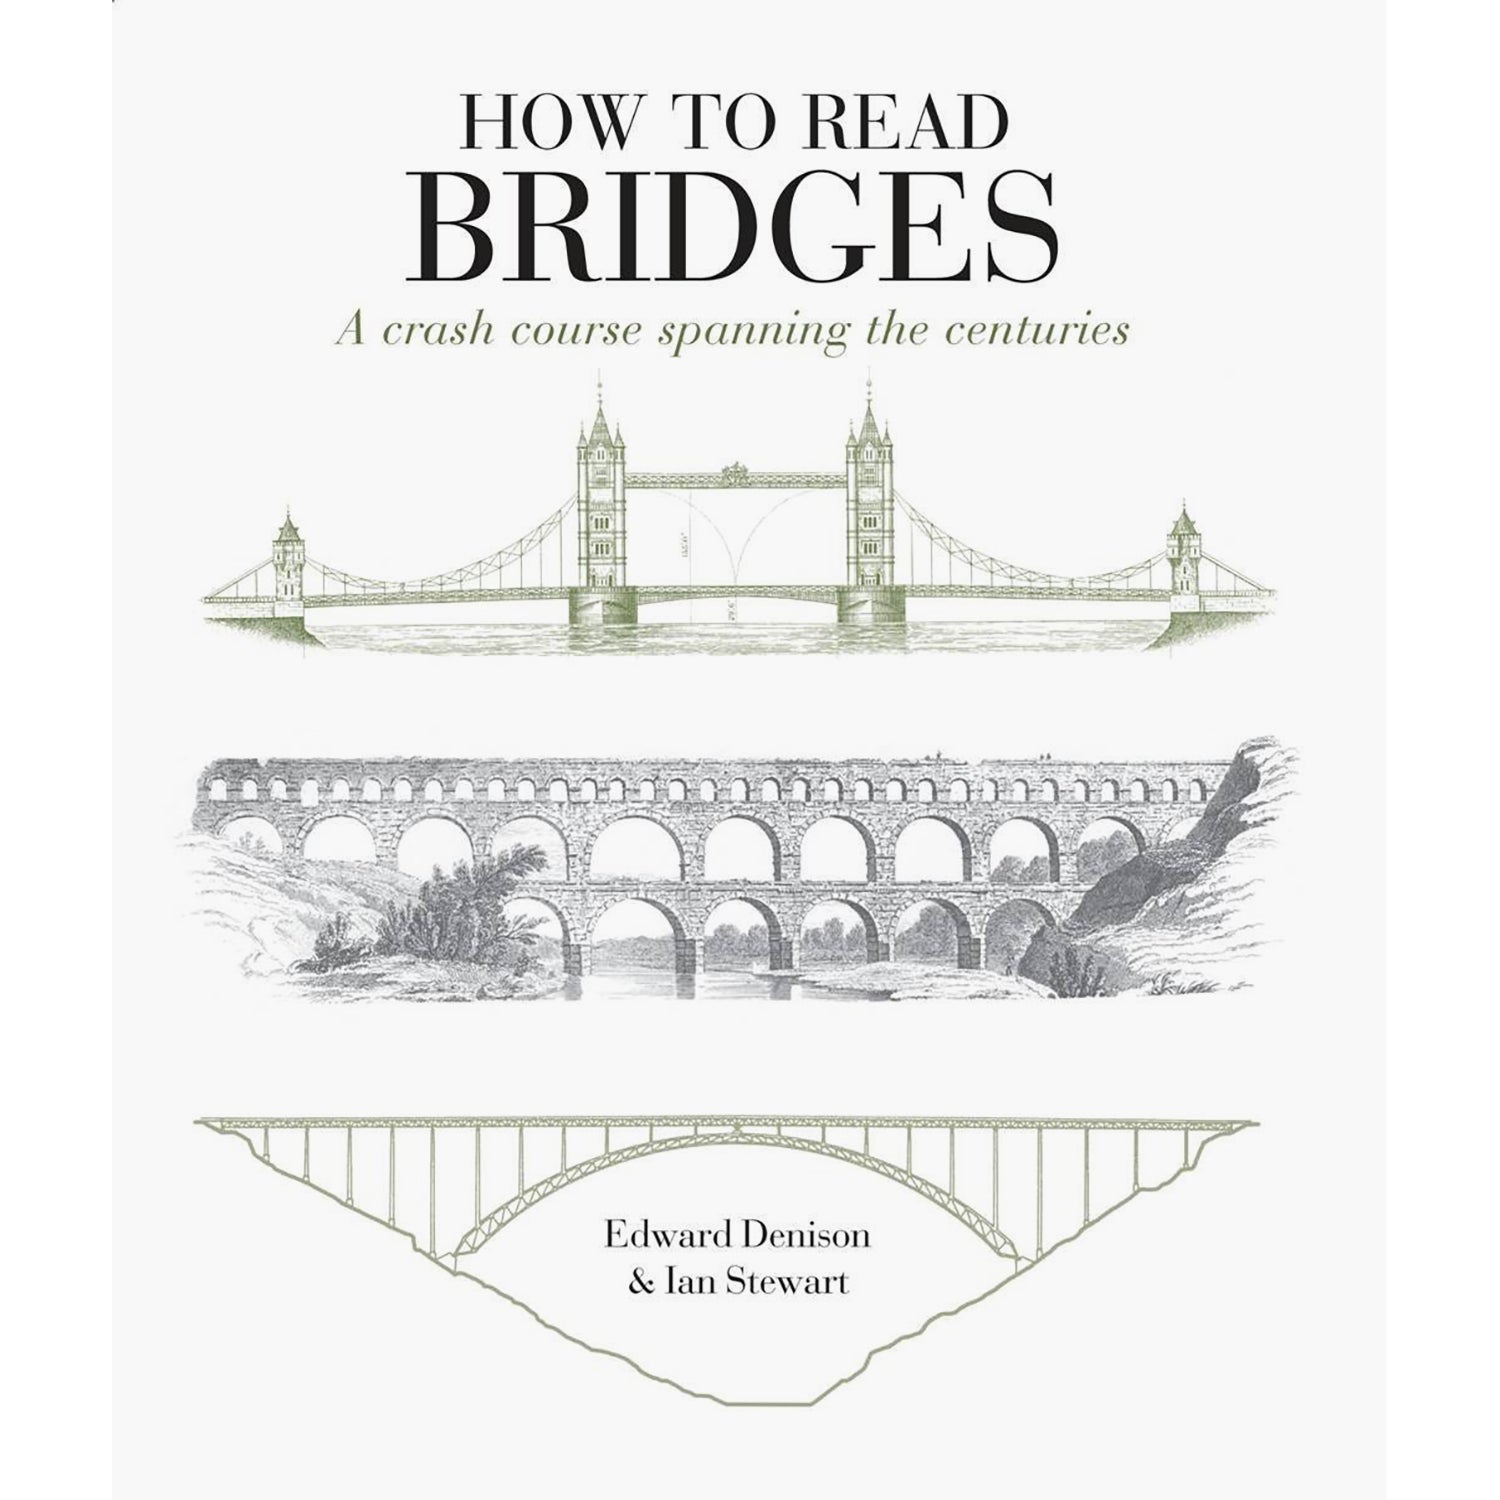 How to read bridges book cover